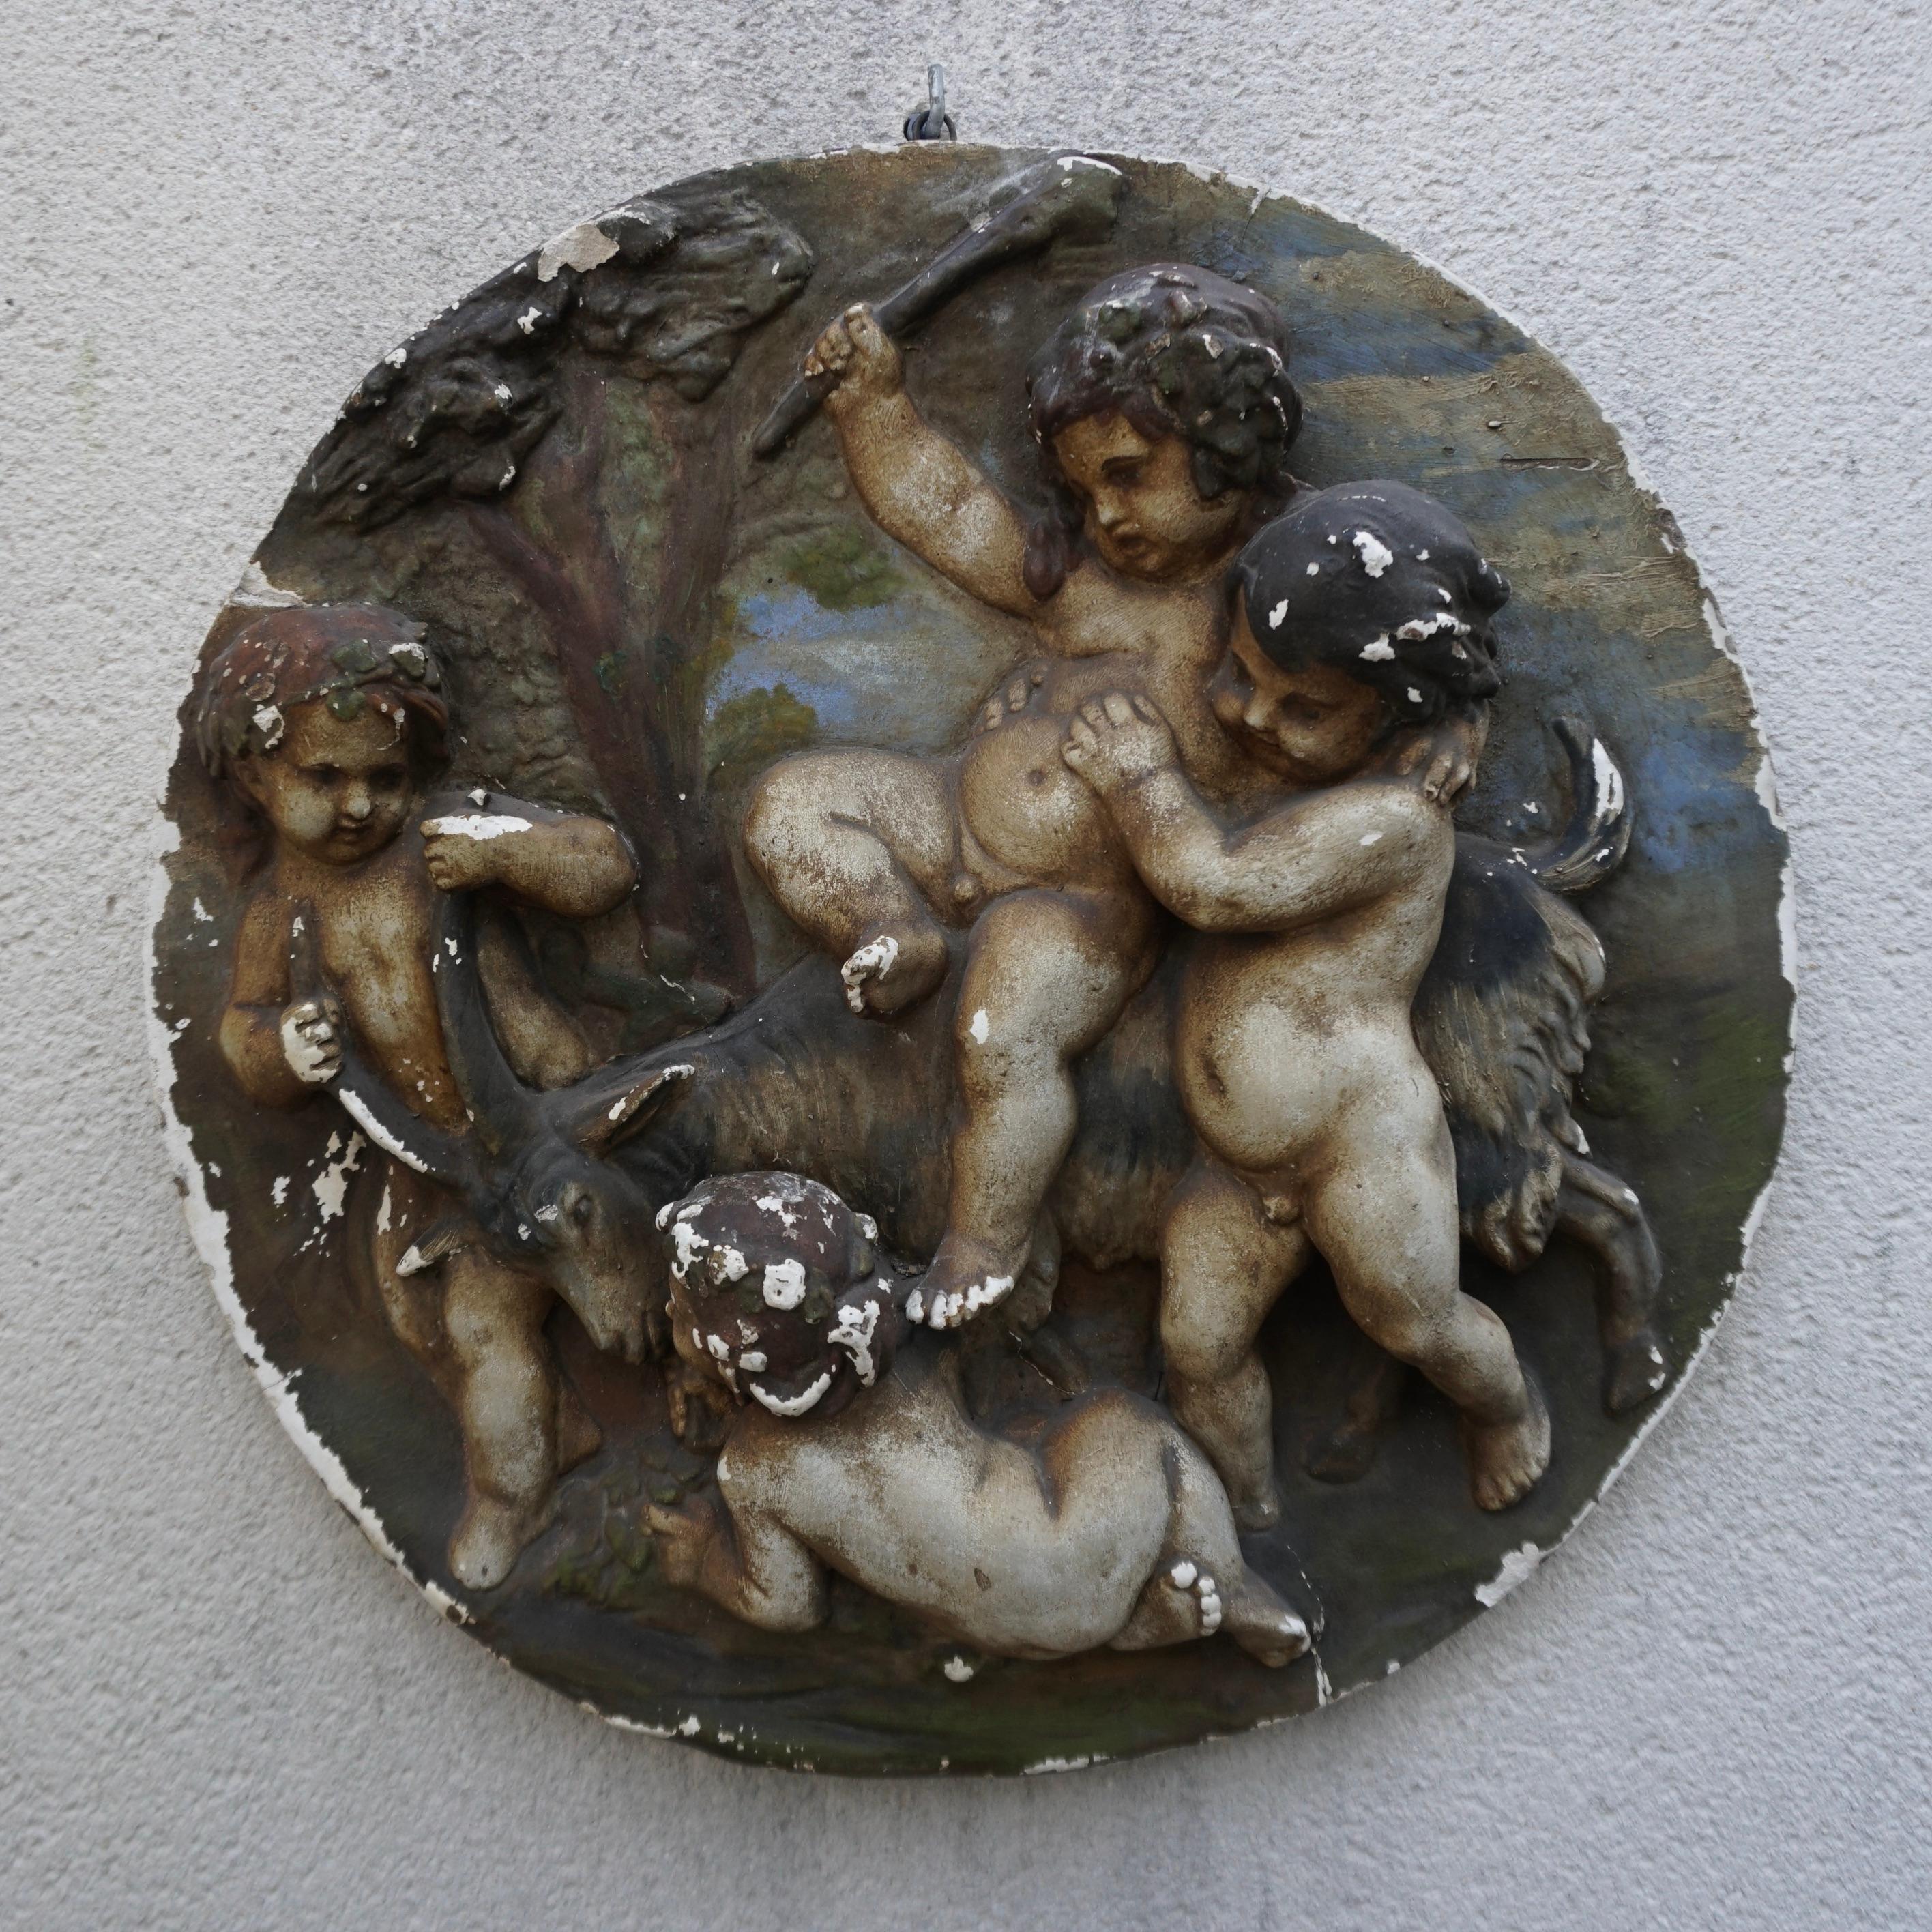 A round colorful plaster wall relief of four putti.
This beautiful religious artwork comes from an old monastery.

Diameter 20.8